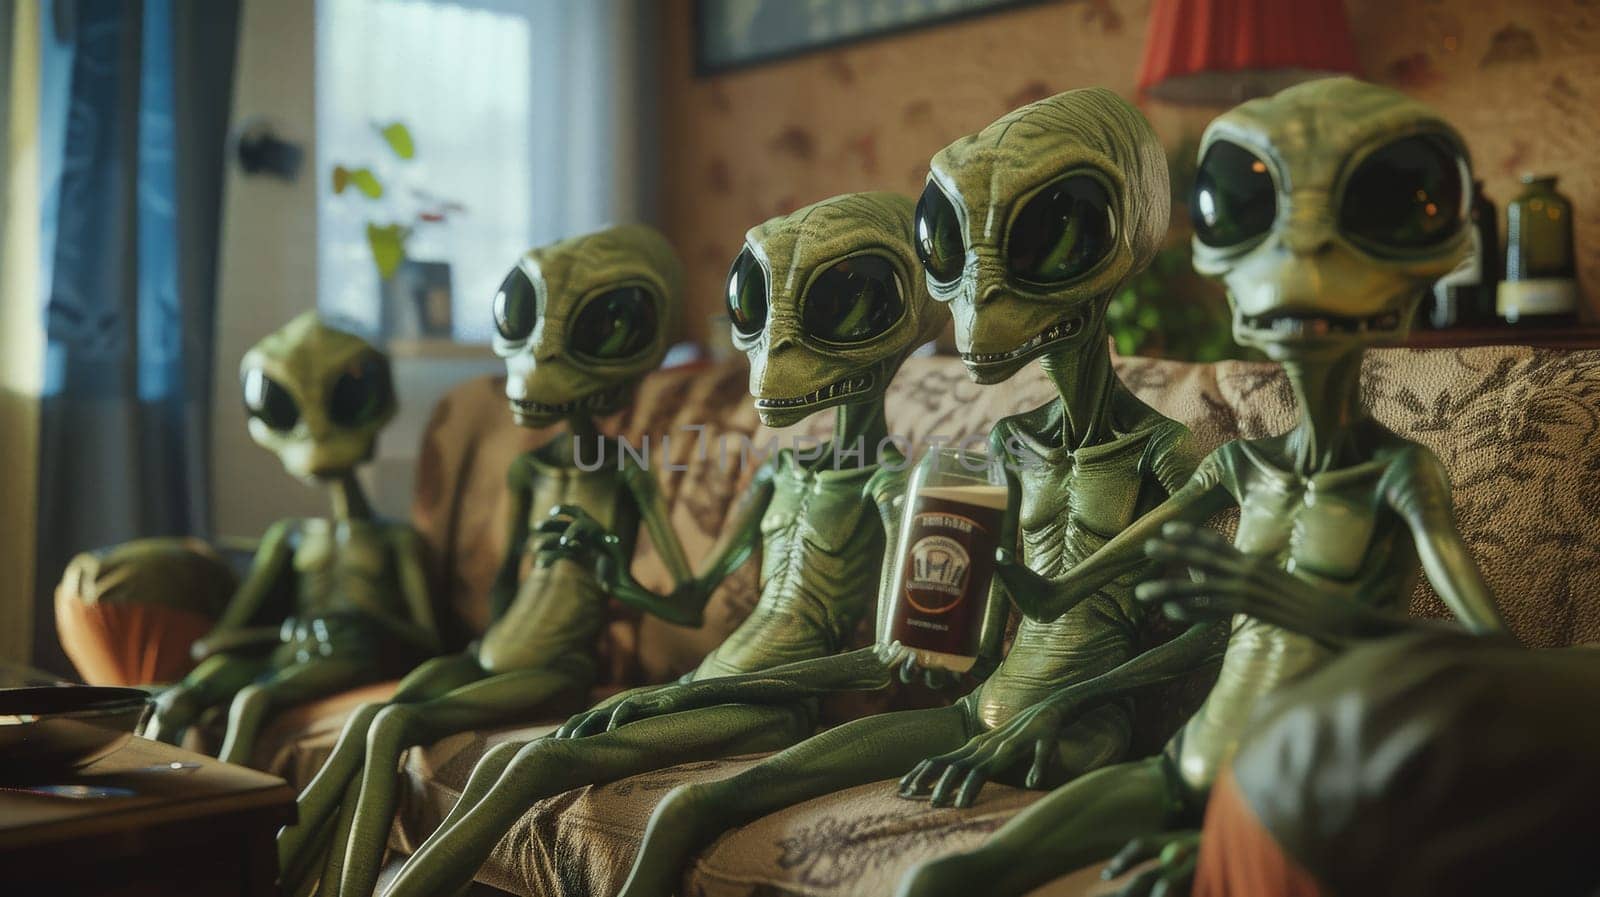 alien creatures lounging on a sofa and holding drinking, Cinematic scene by nijieimu